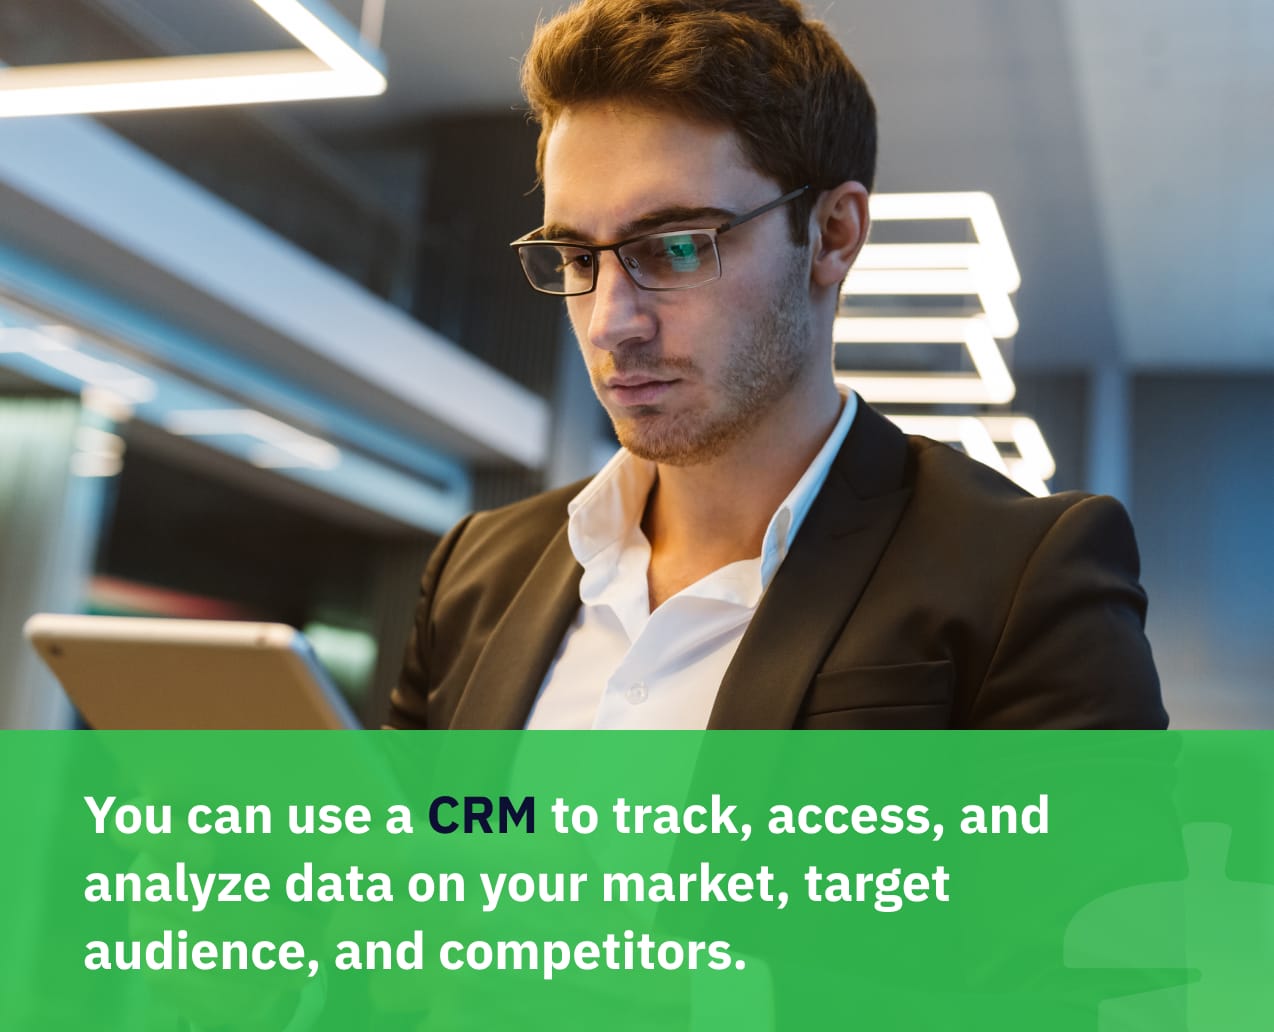 Use a CRM to track, access, and analyze sales data